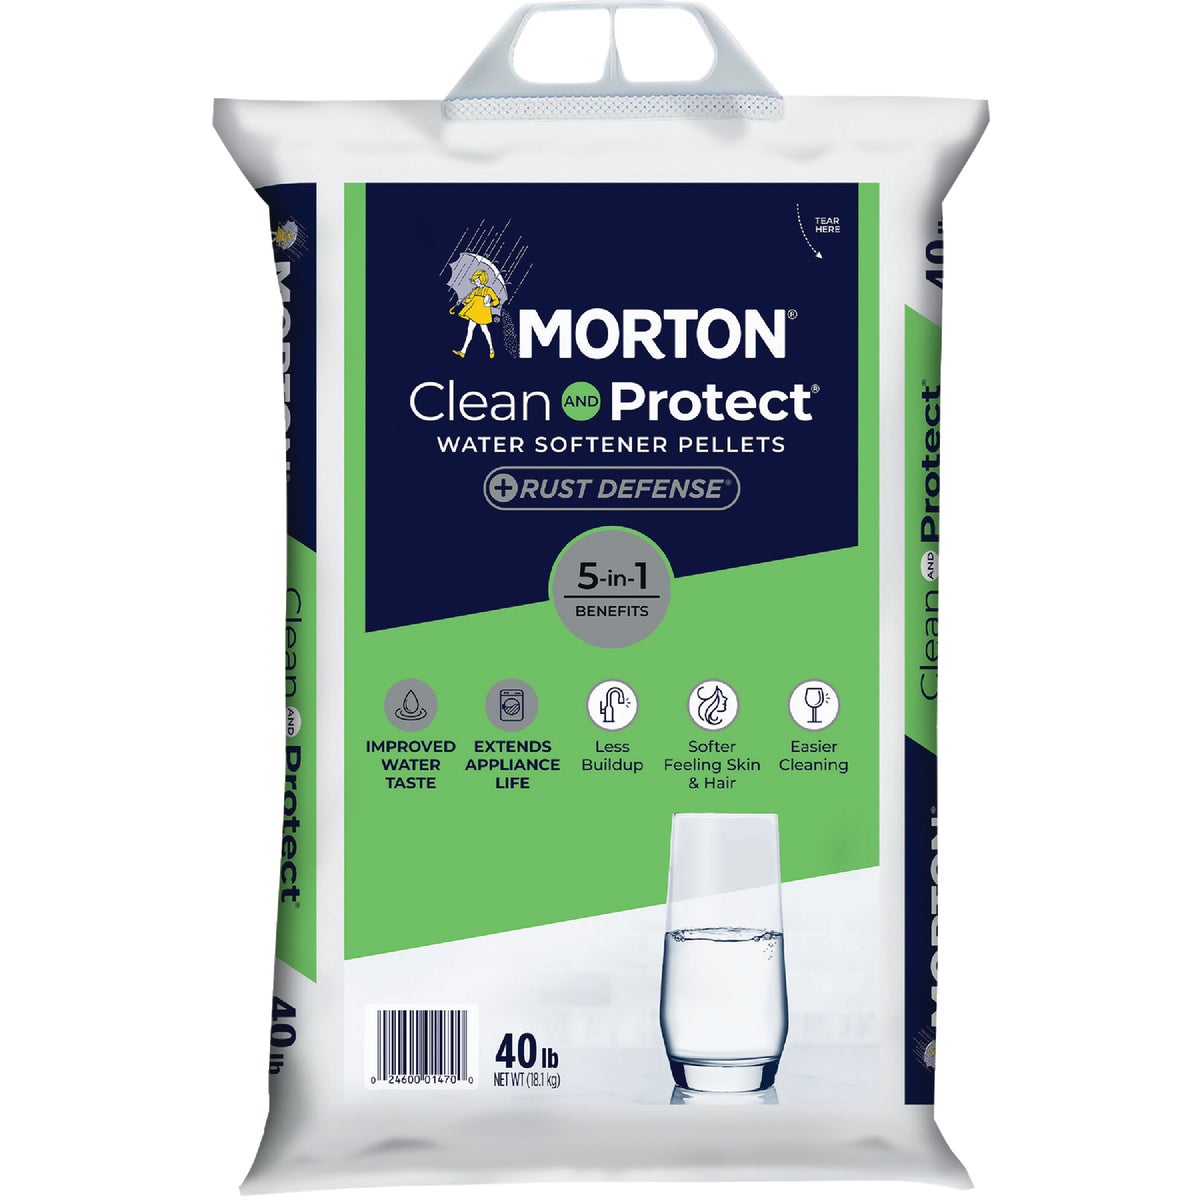 Item 400803, Morton Clean and Protect Plus Rust Defense removes excess iron, giving you 